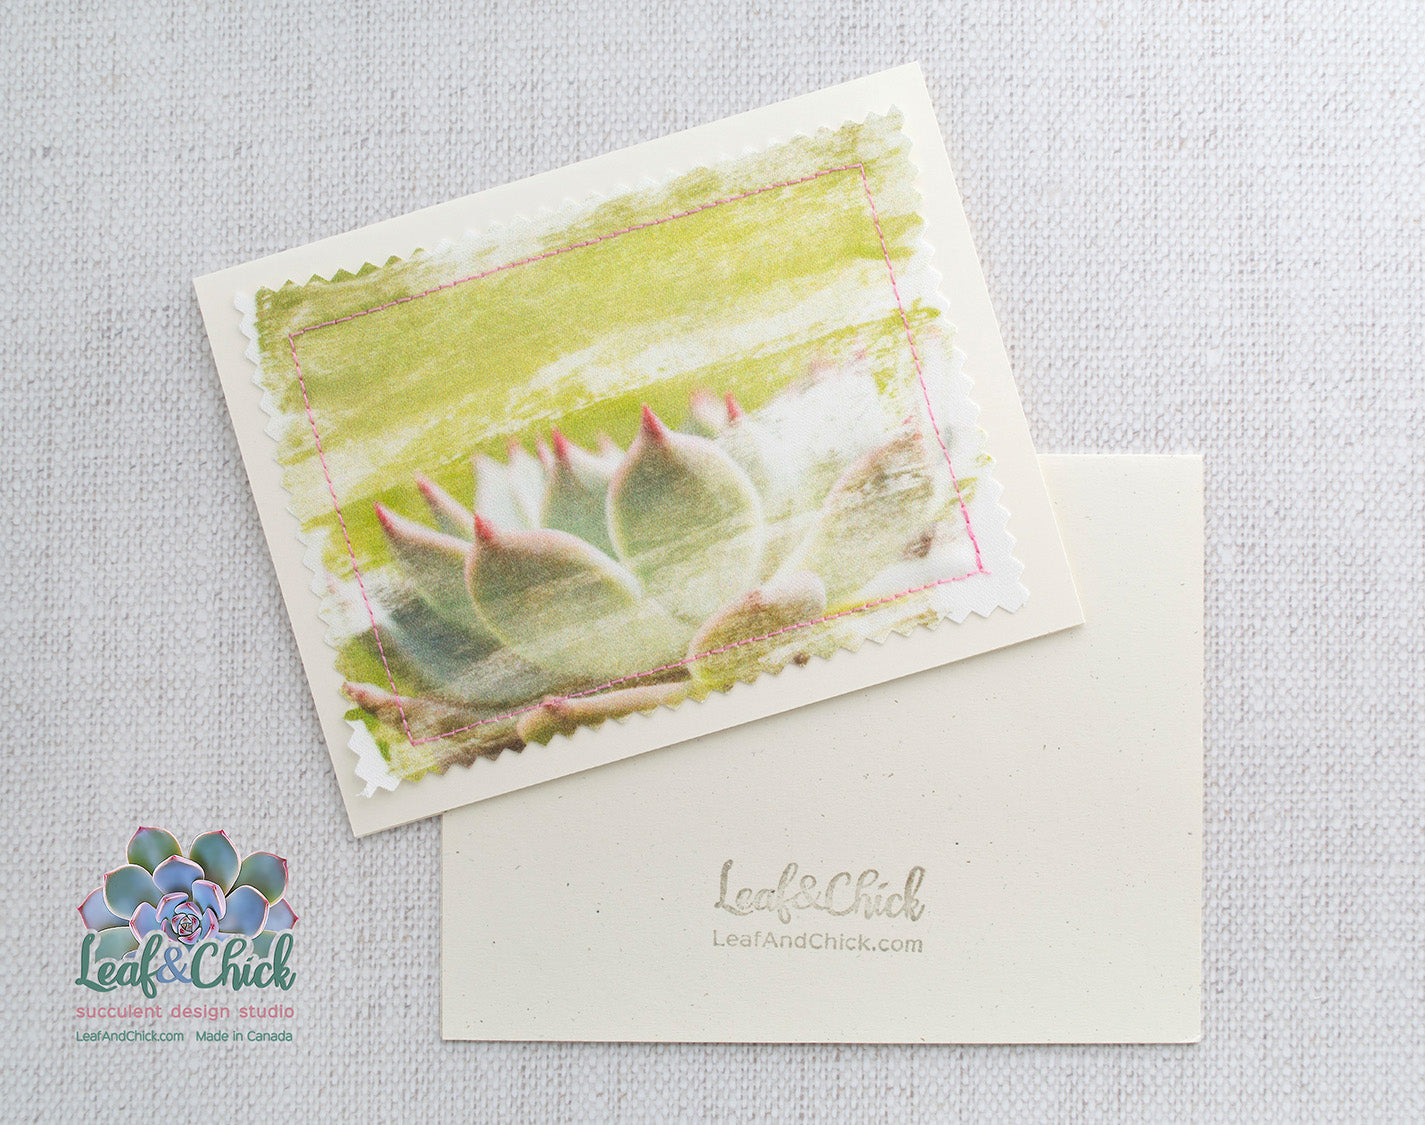 printed fabric succulent greeting card by Leaf & Chick